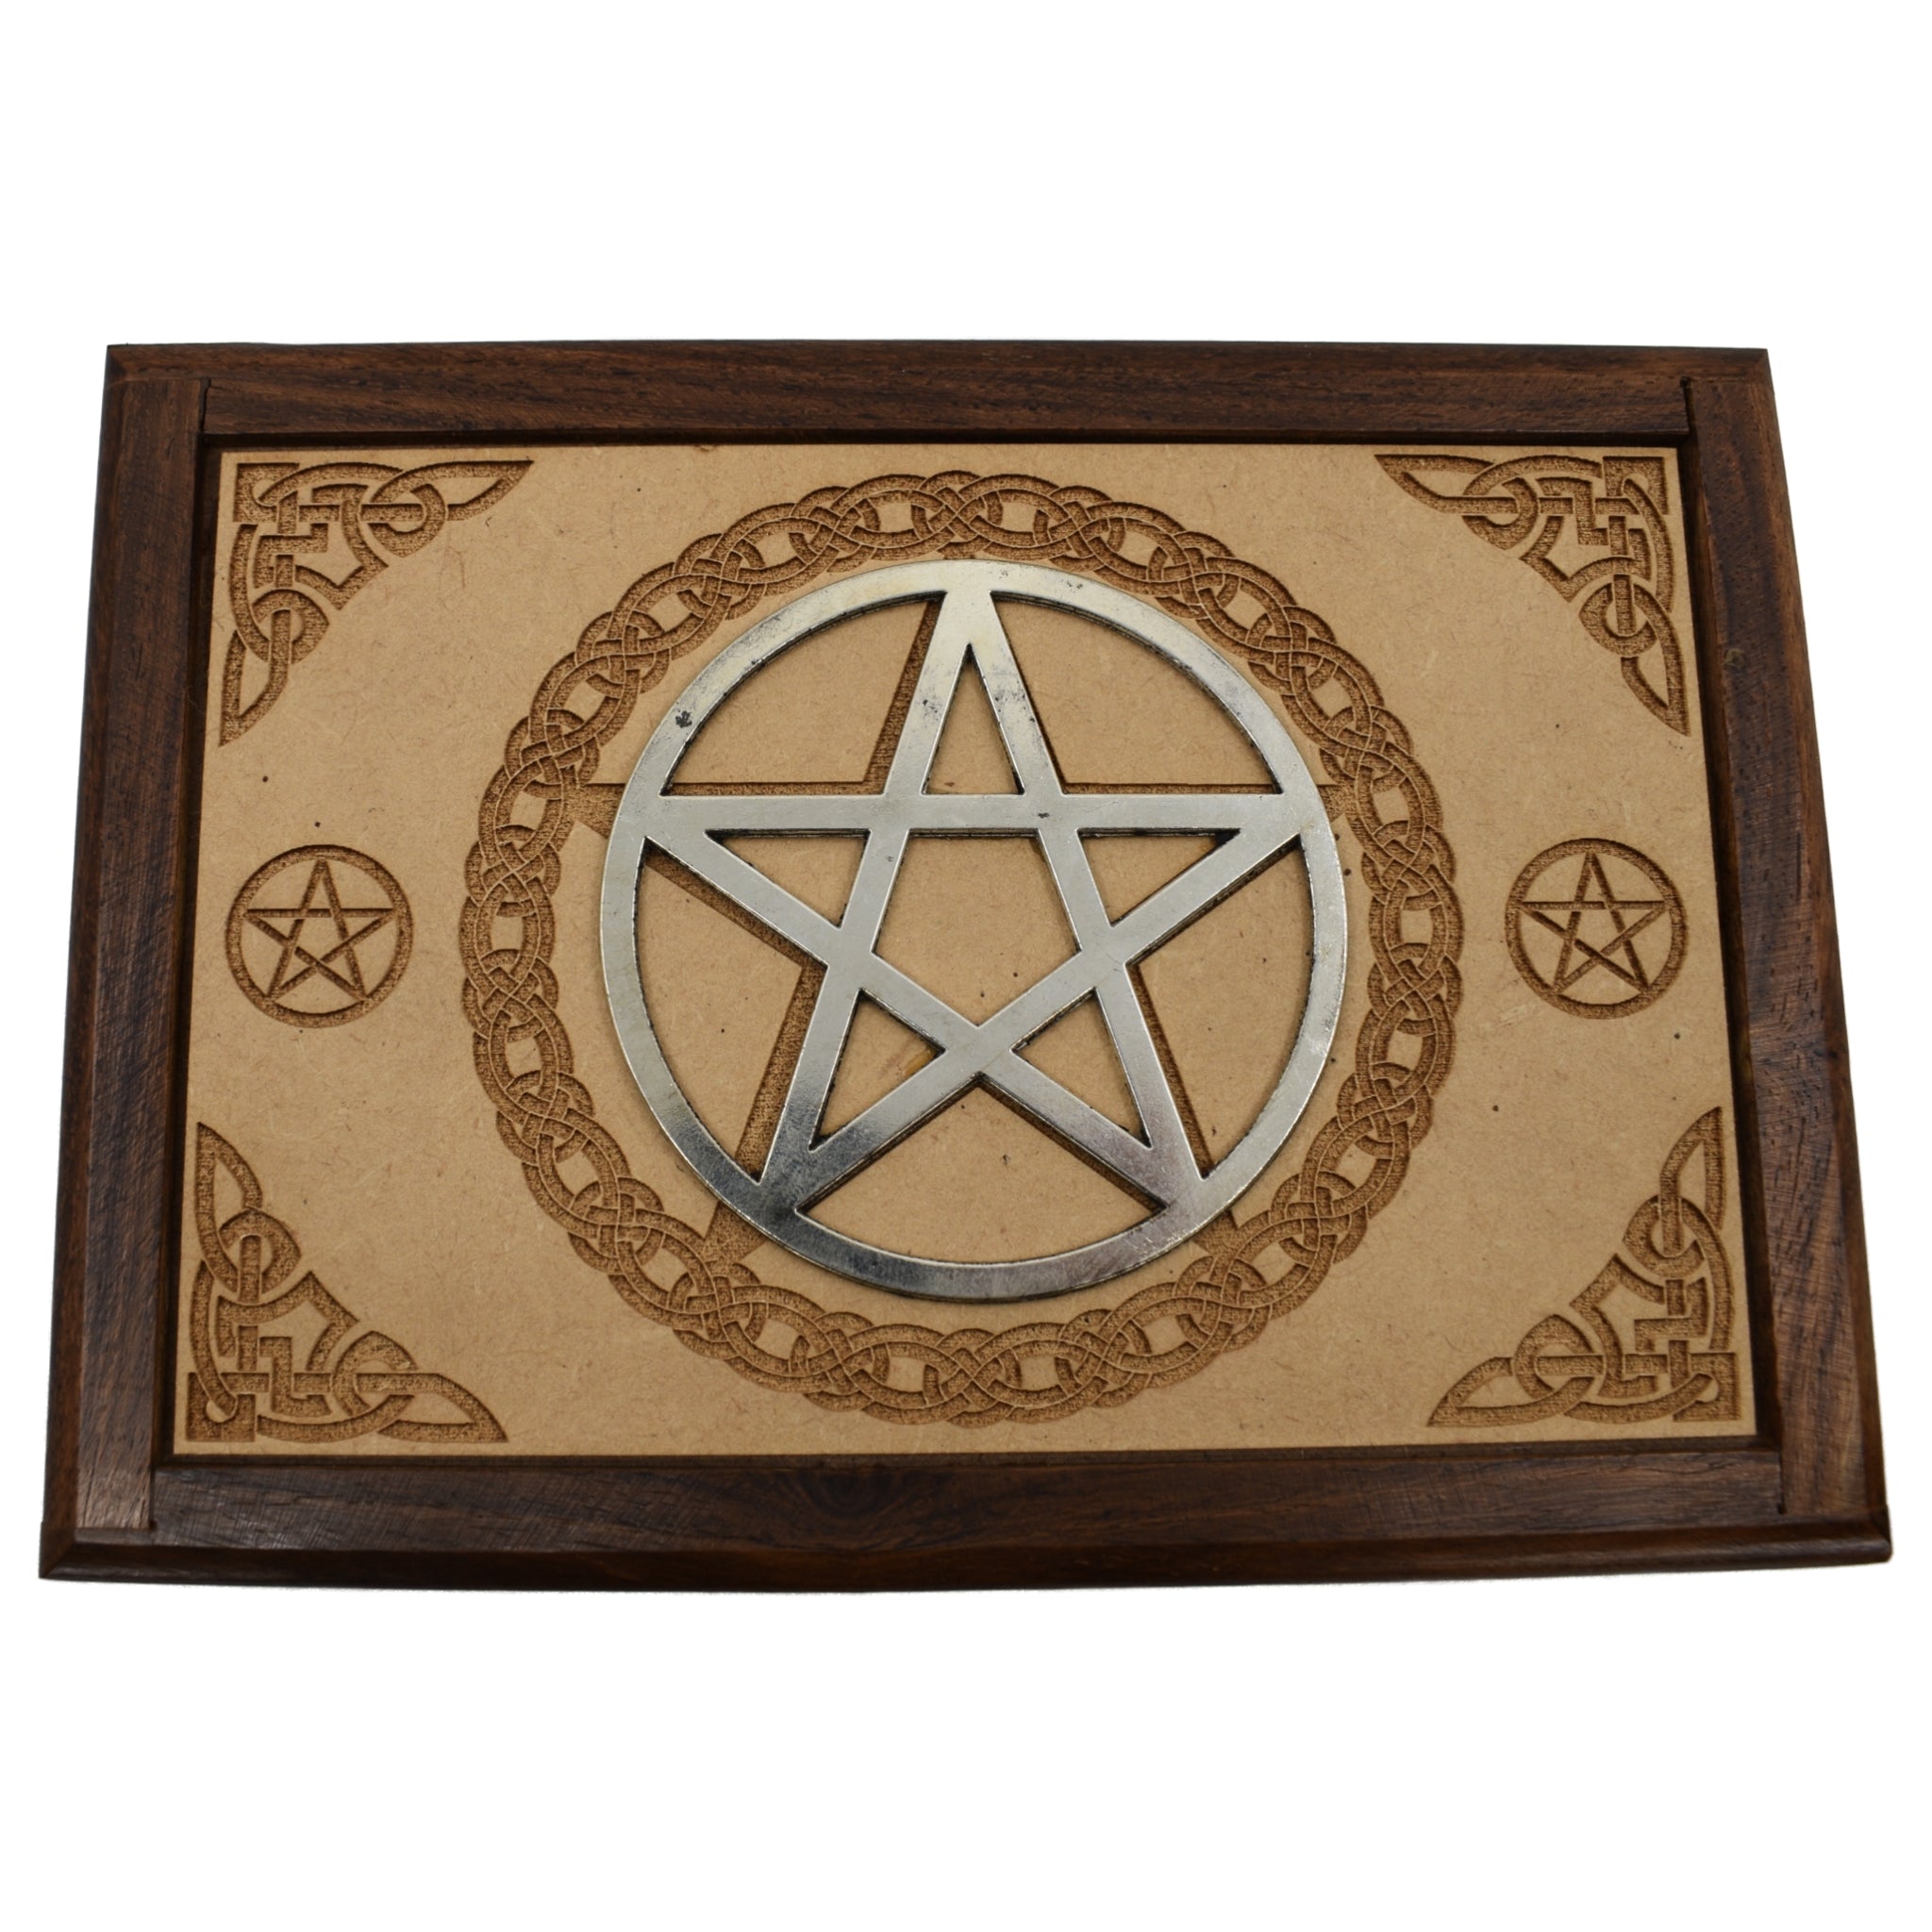 wood box dark, light covering top with inlaid metal pentacle 